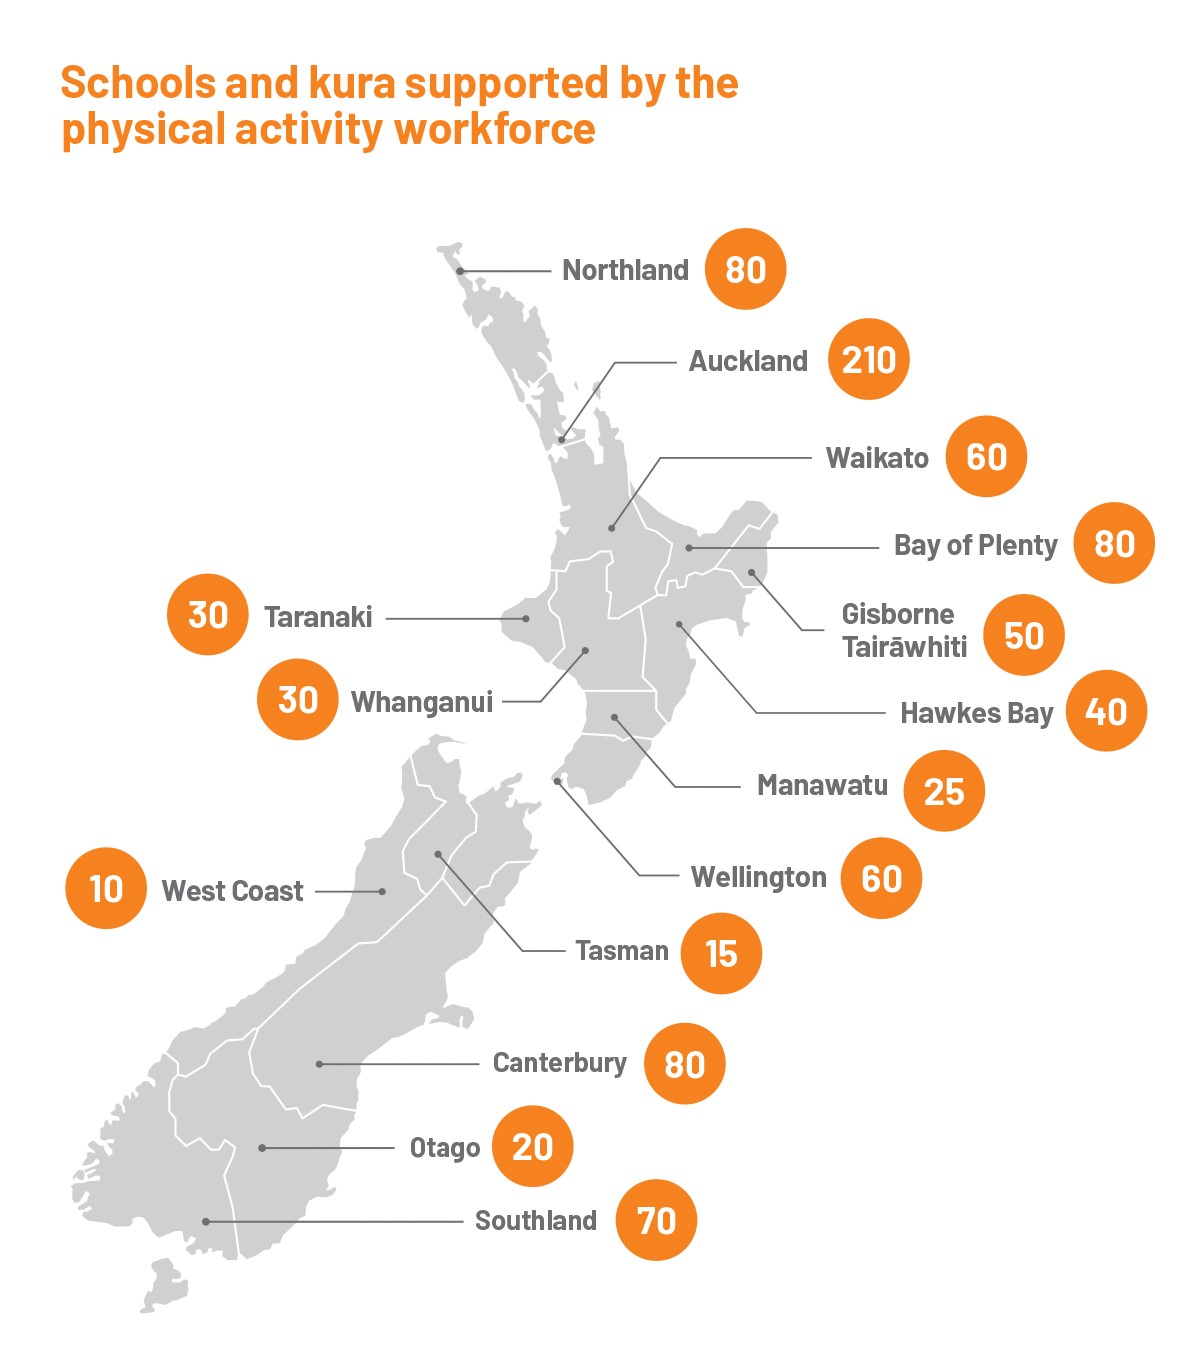 Schools & kura supported by the physical activity workforce